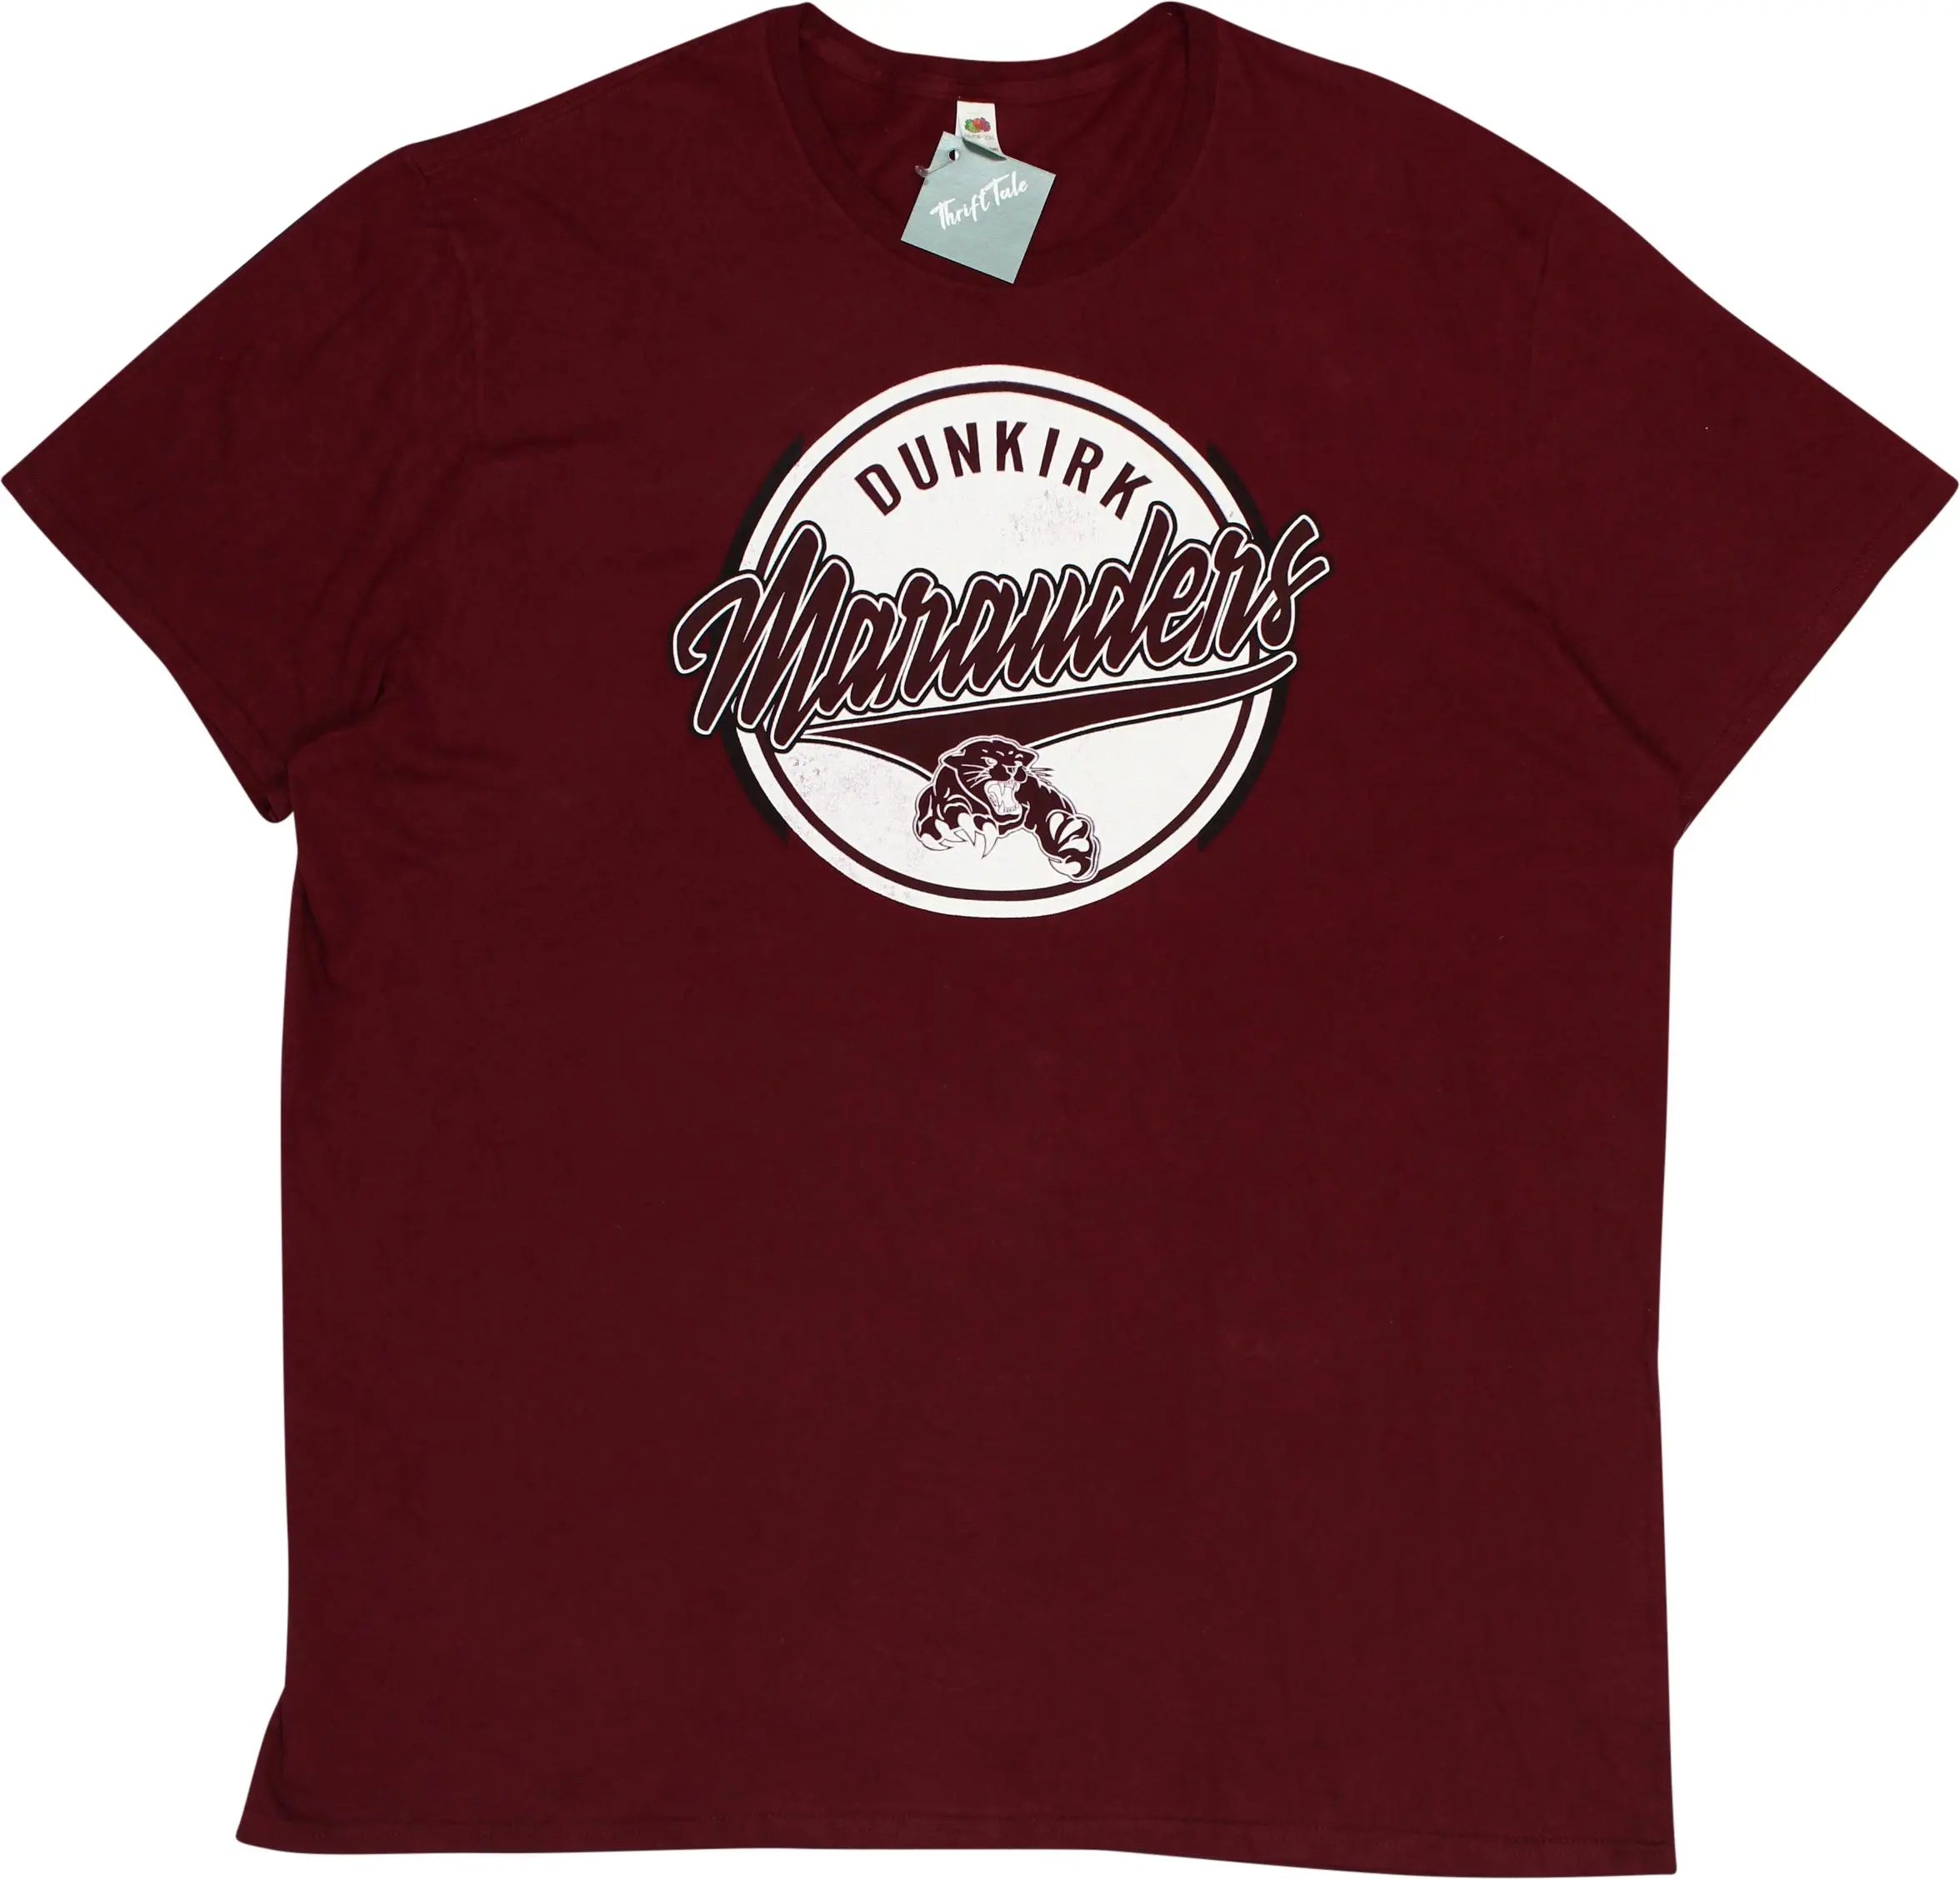 Fruit of the Loom - Dunkirk Marauders T-Shirt- ThriftTale.com - Vintage and second handclothing